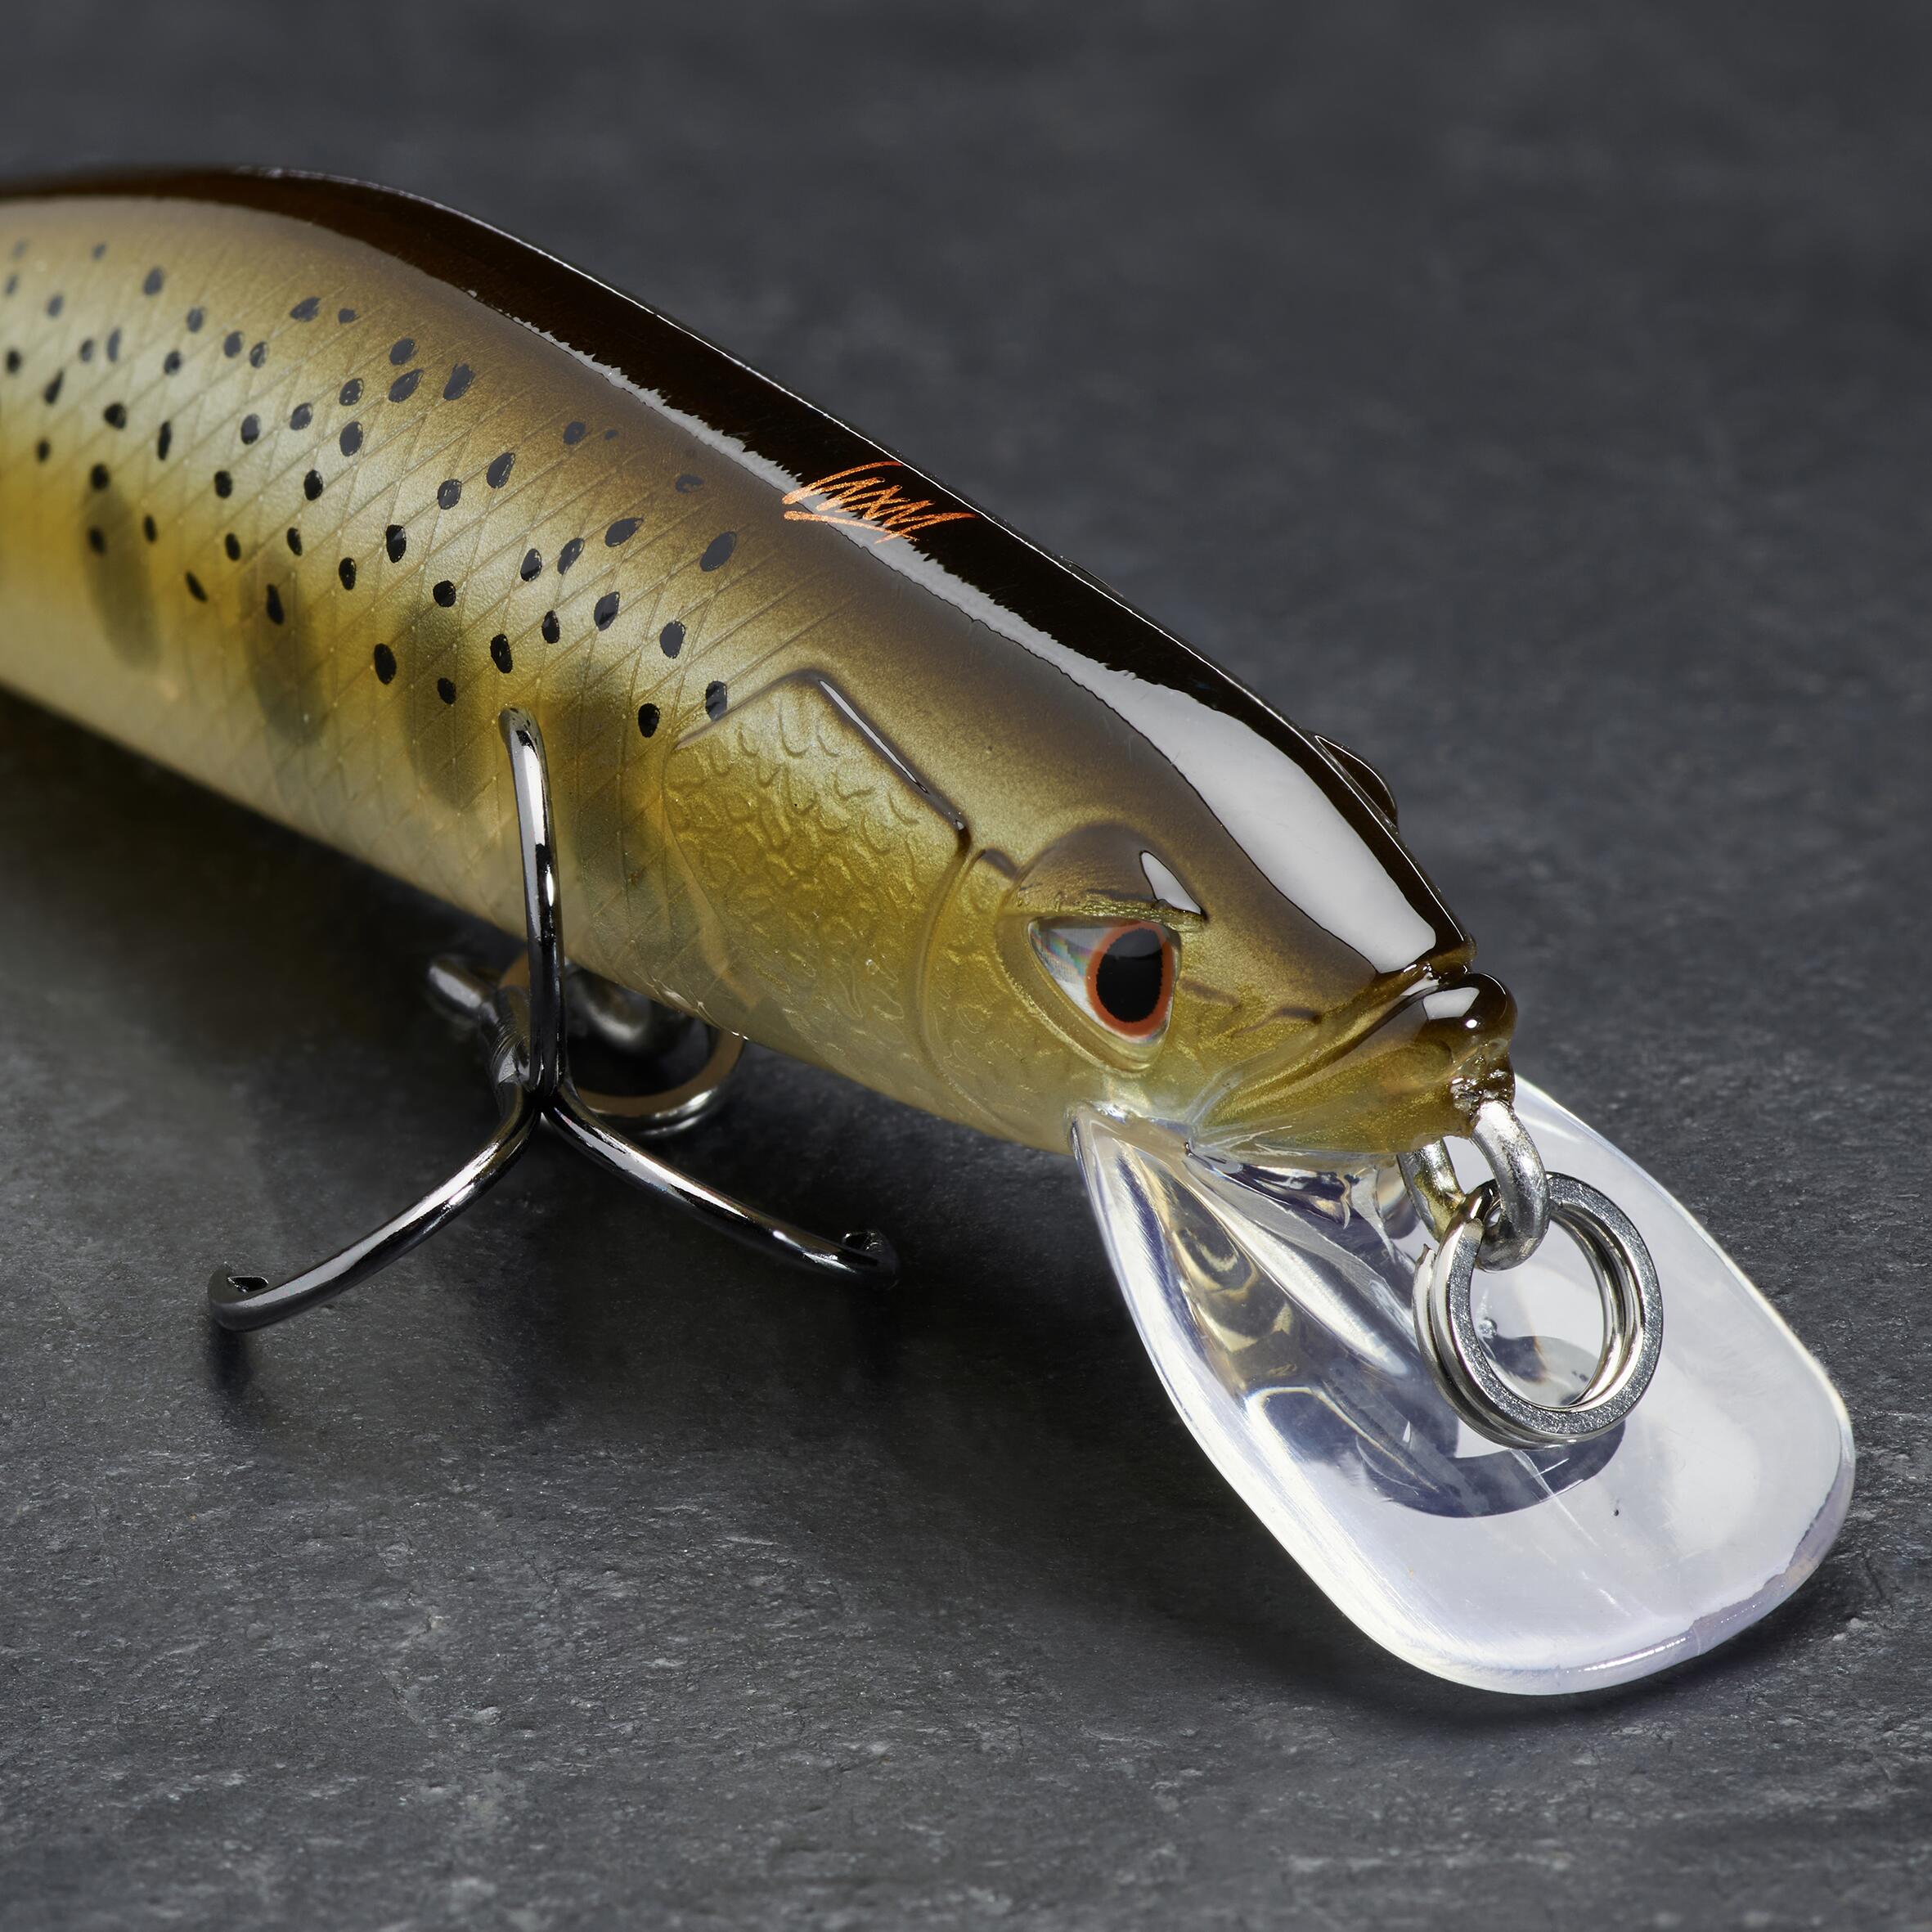 MINNOW HARD LURE FOR TROUT WXM MNWFS 70 US YAMAME - BROWN 2/4